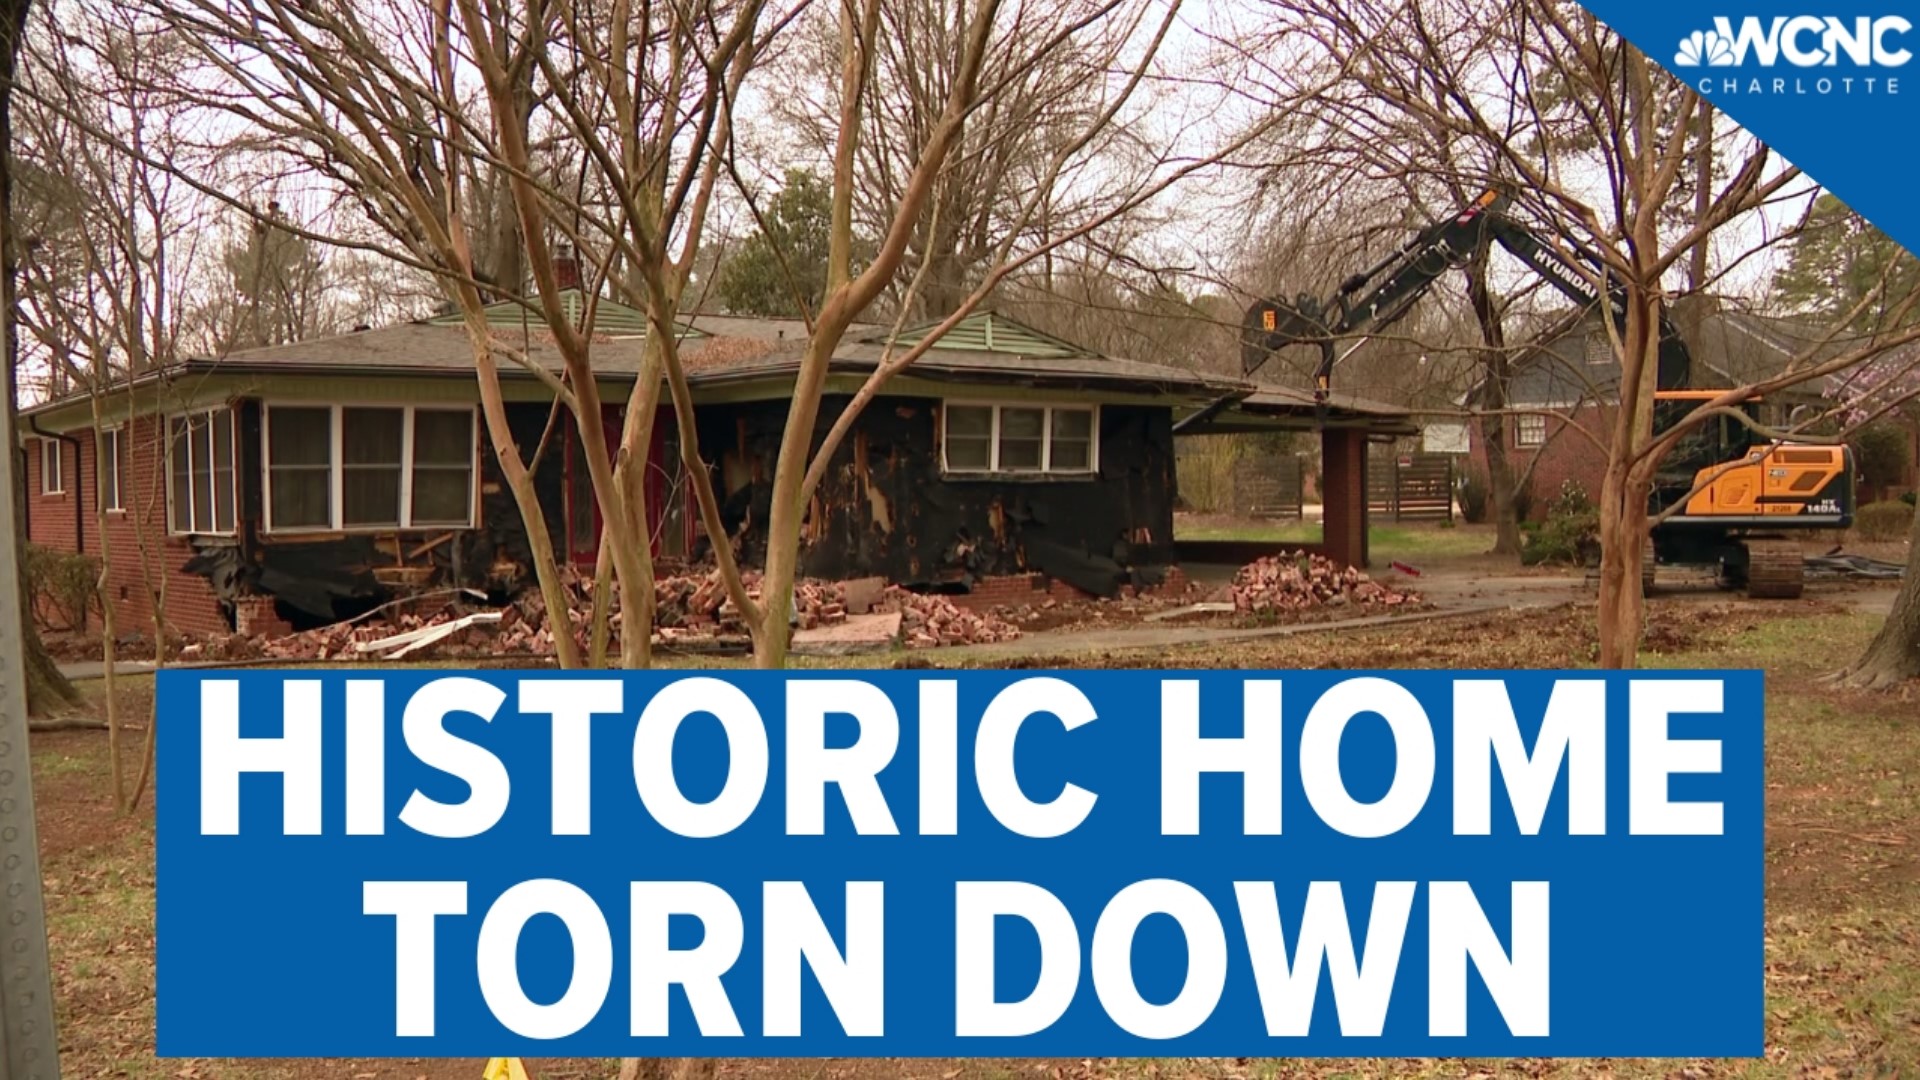 Lyles tore down a home she owns in the historically-Black McCrorey Heights neighborhood, and there are some neighbors who don't like what she's done.